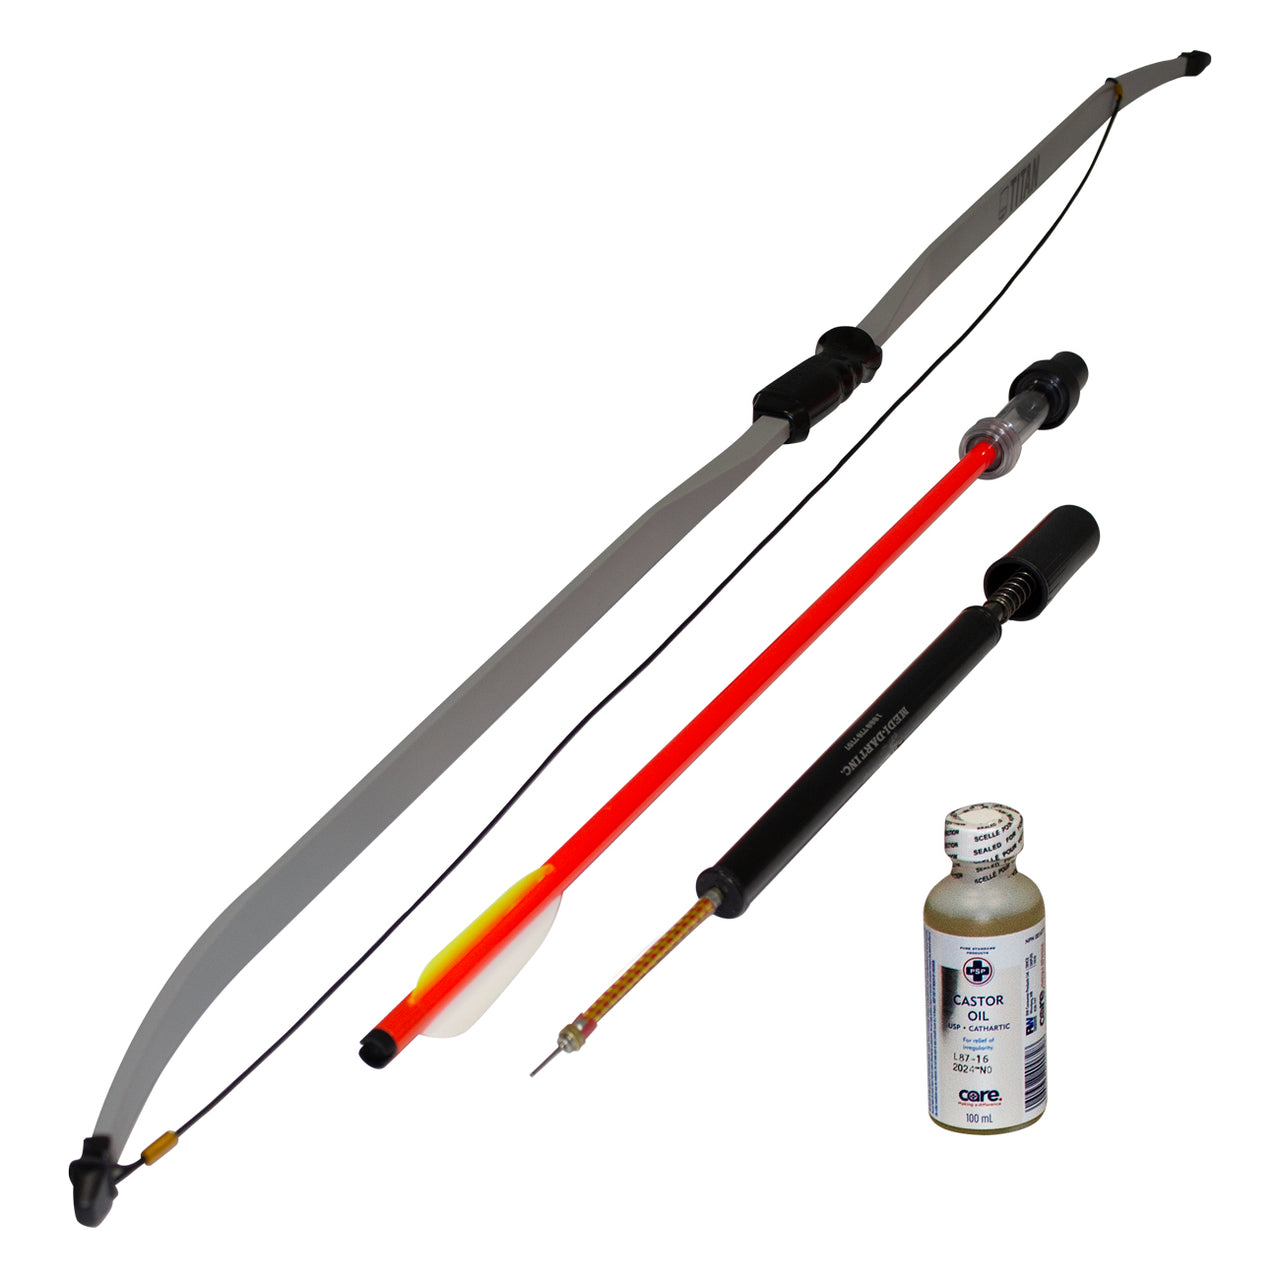 Medi-Dart projectile kit bow and arrow (MDPK)